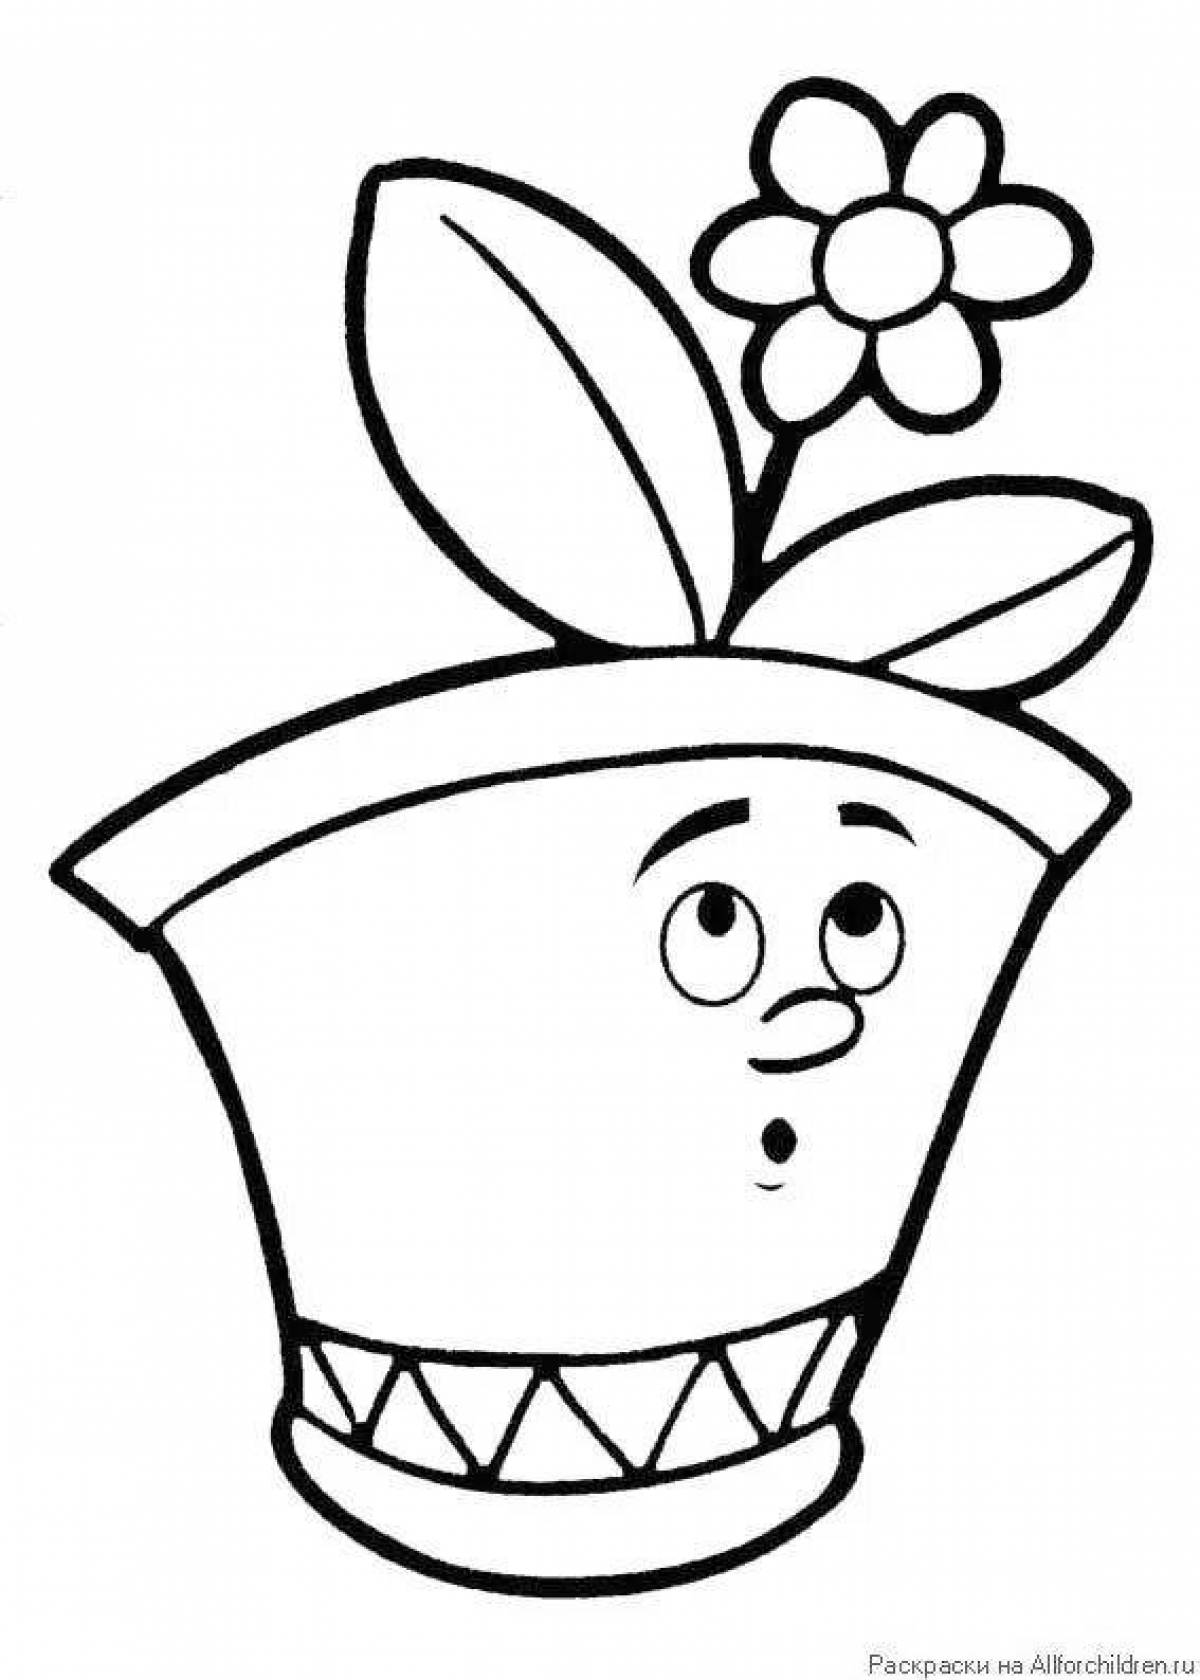 Glamorous flower pot coloring page